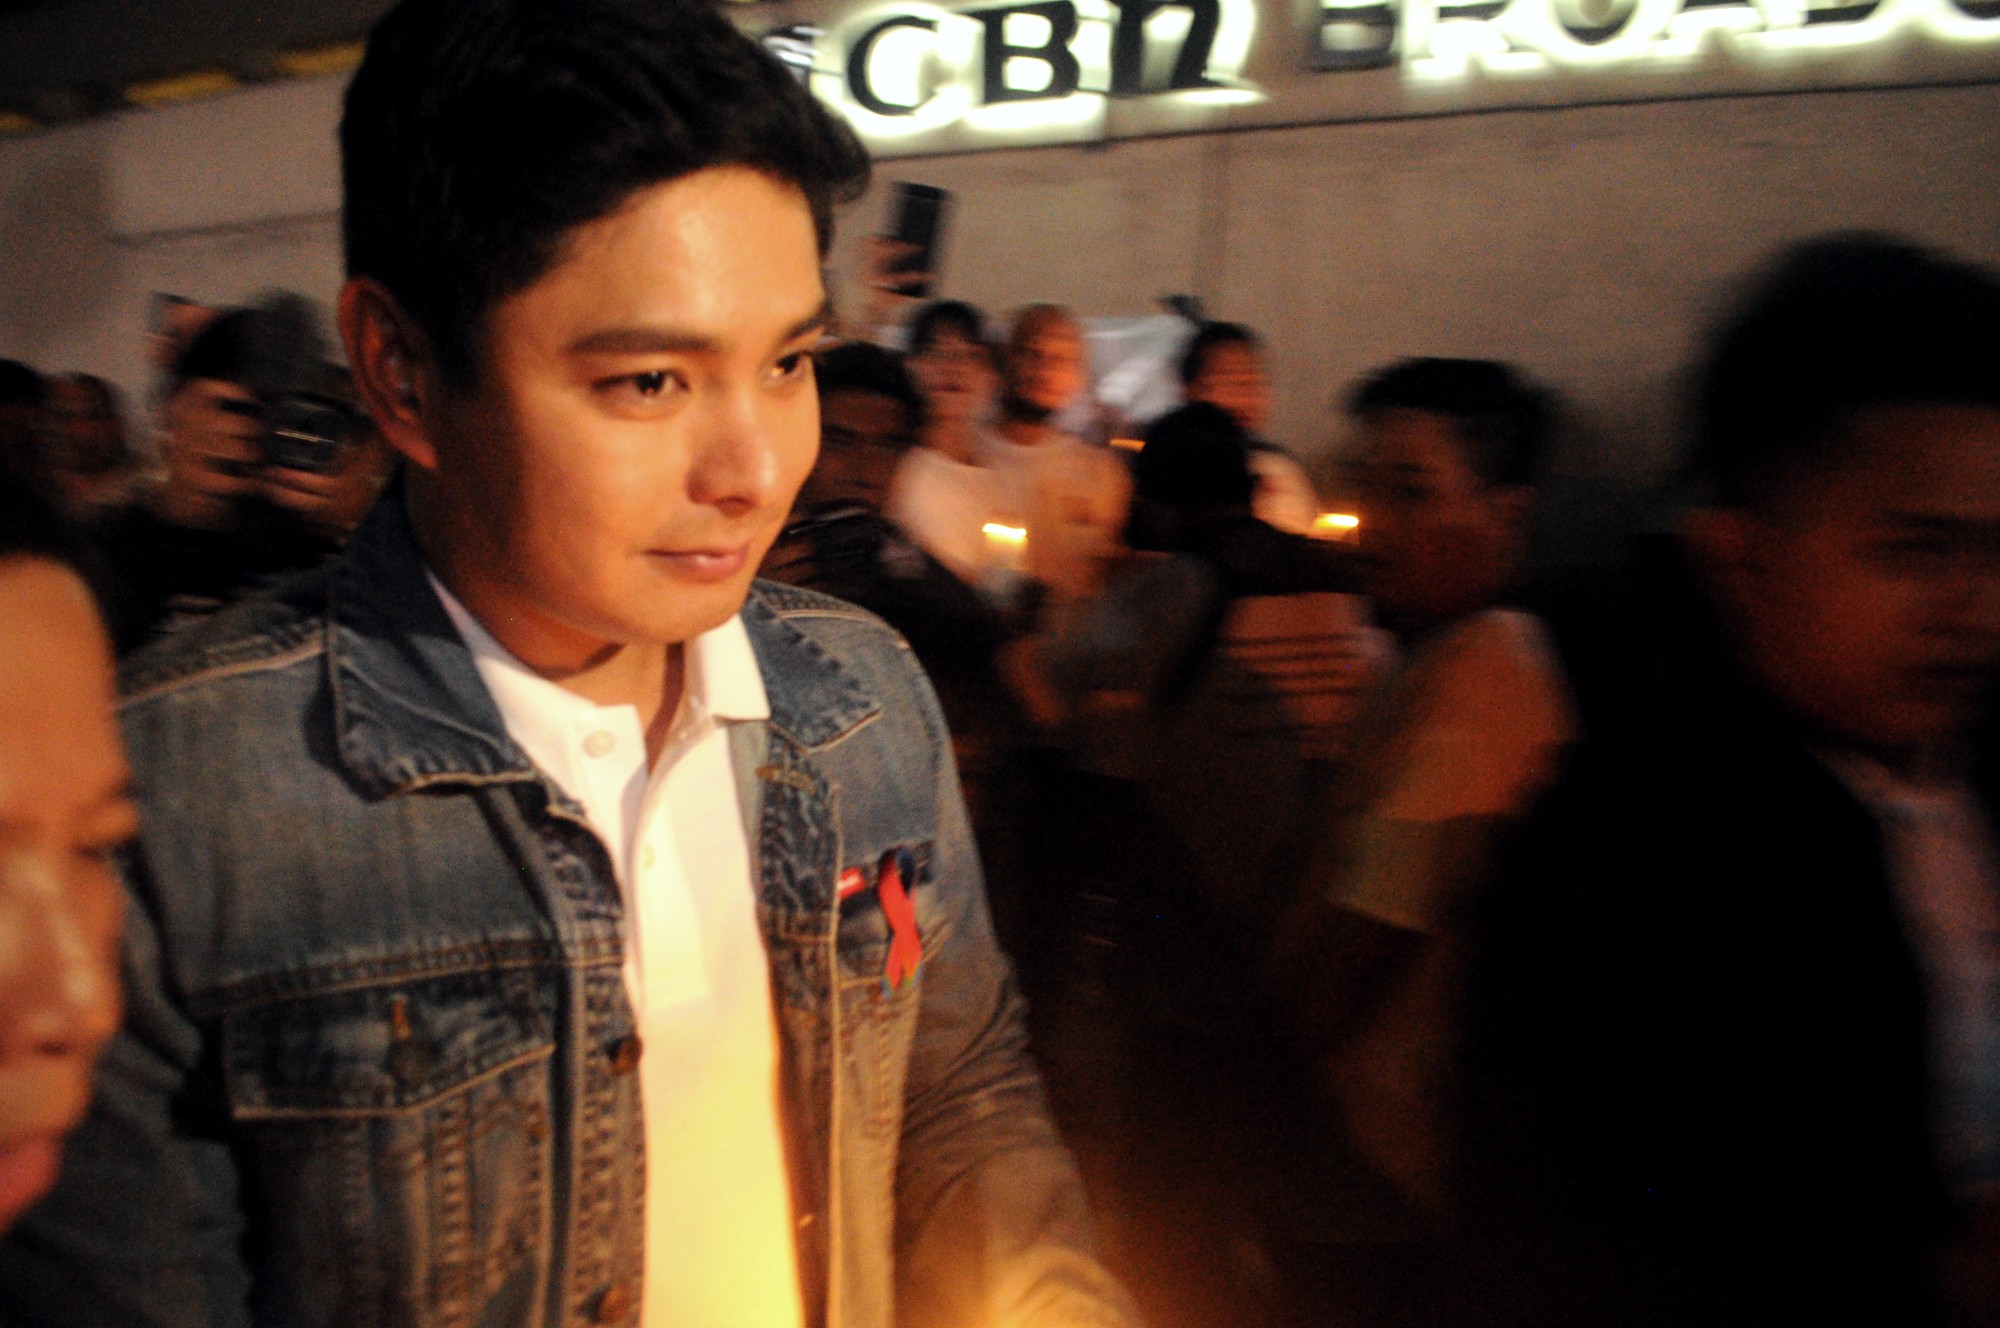 Actor Coco Martin, of ABS-CBN's long-running teleserye Ang Probinsyano, joins the protest action, carrying a candle and warrying the ribbon that symbolize the campaign for ABS-CBN's franchise renewal.